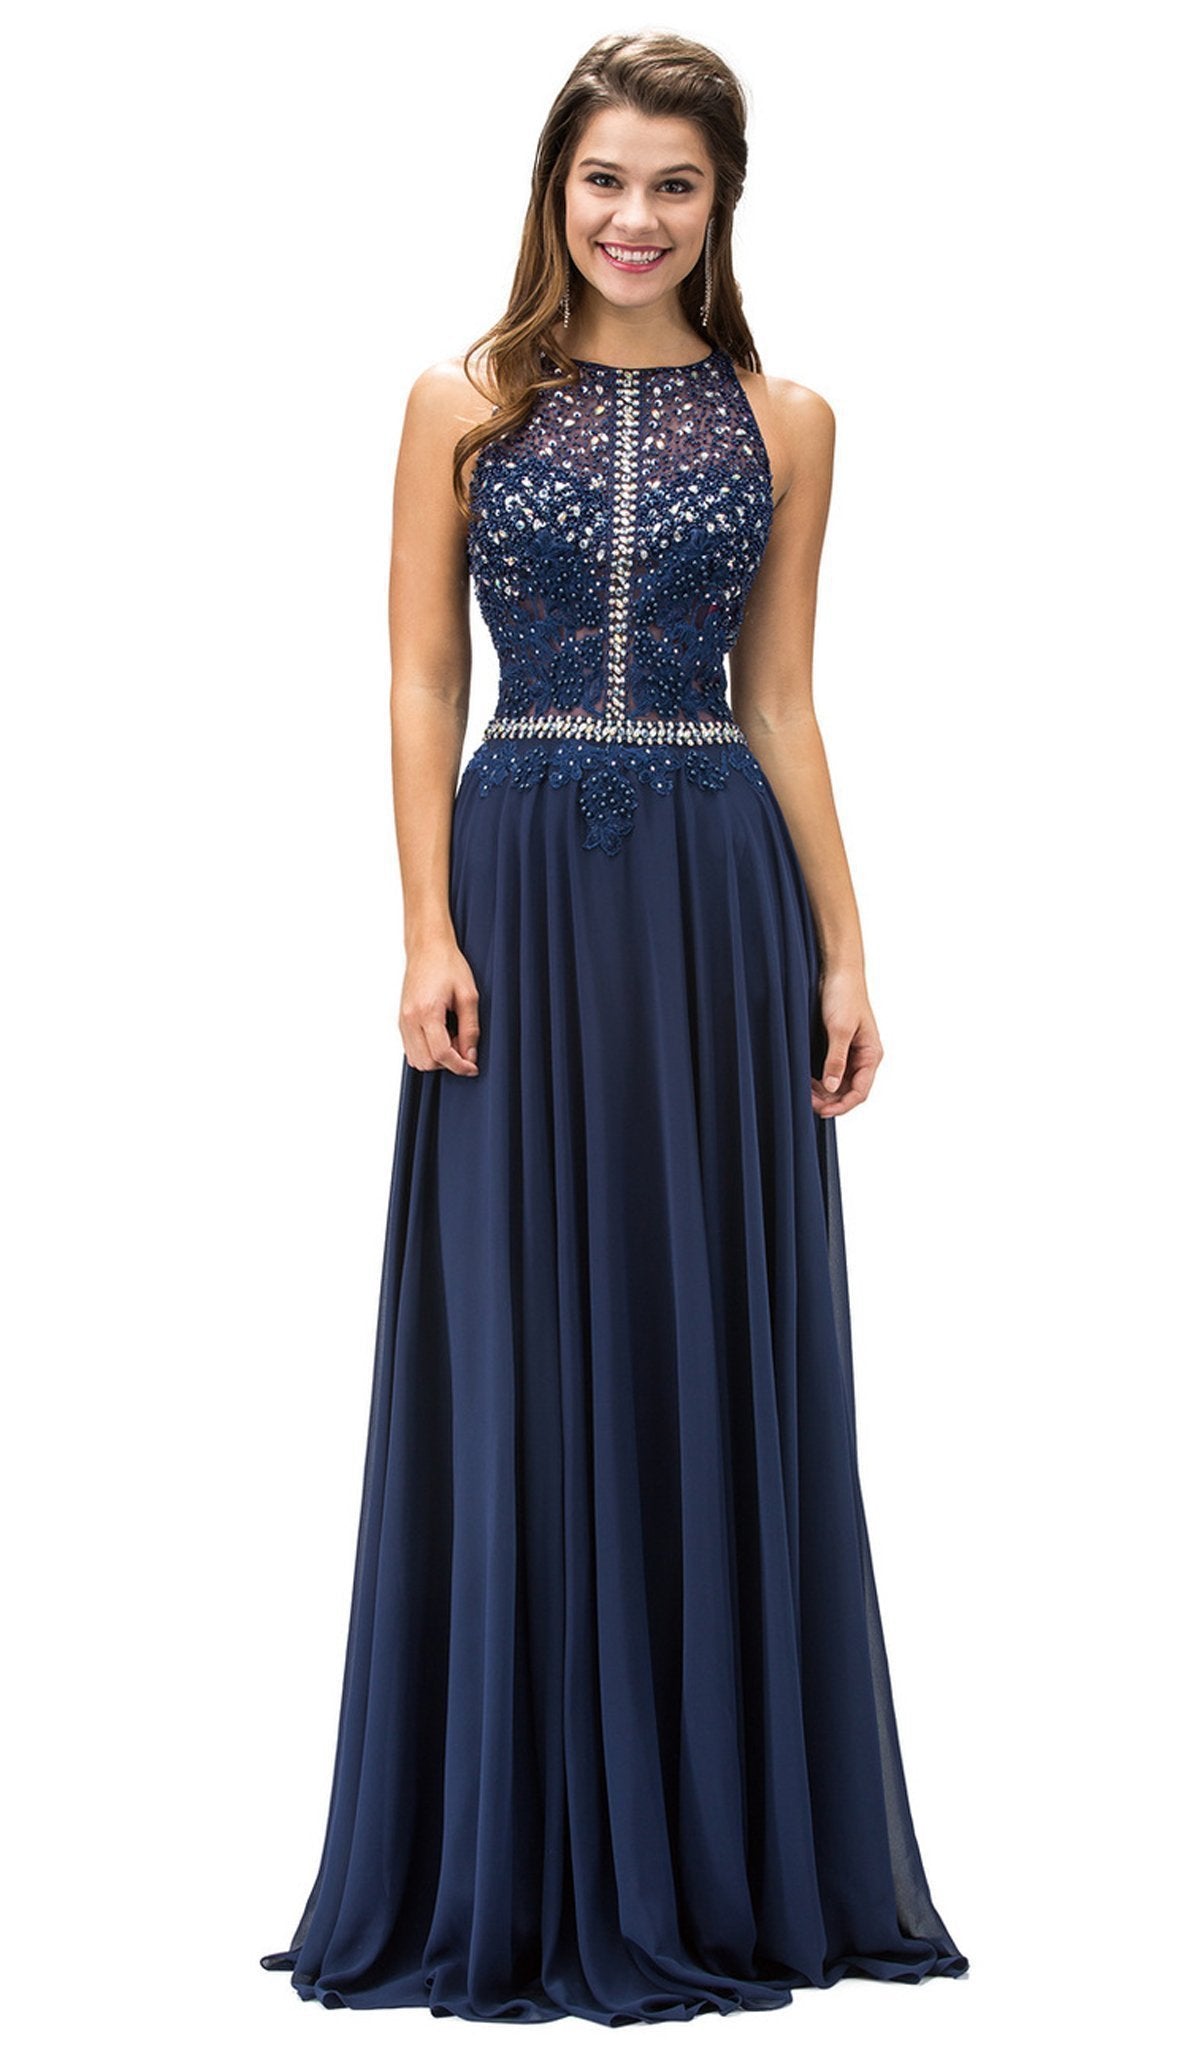 Dancing Queen - 9283 Appliqued Illusion Beaded Chiffon Prom Dress
